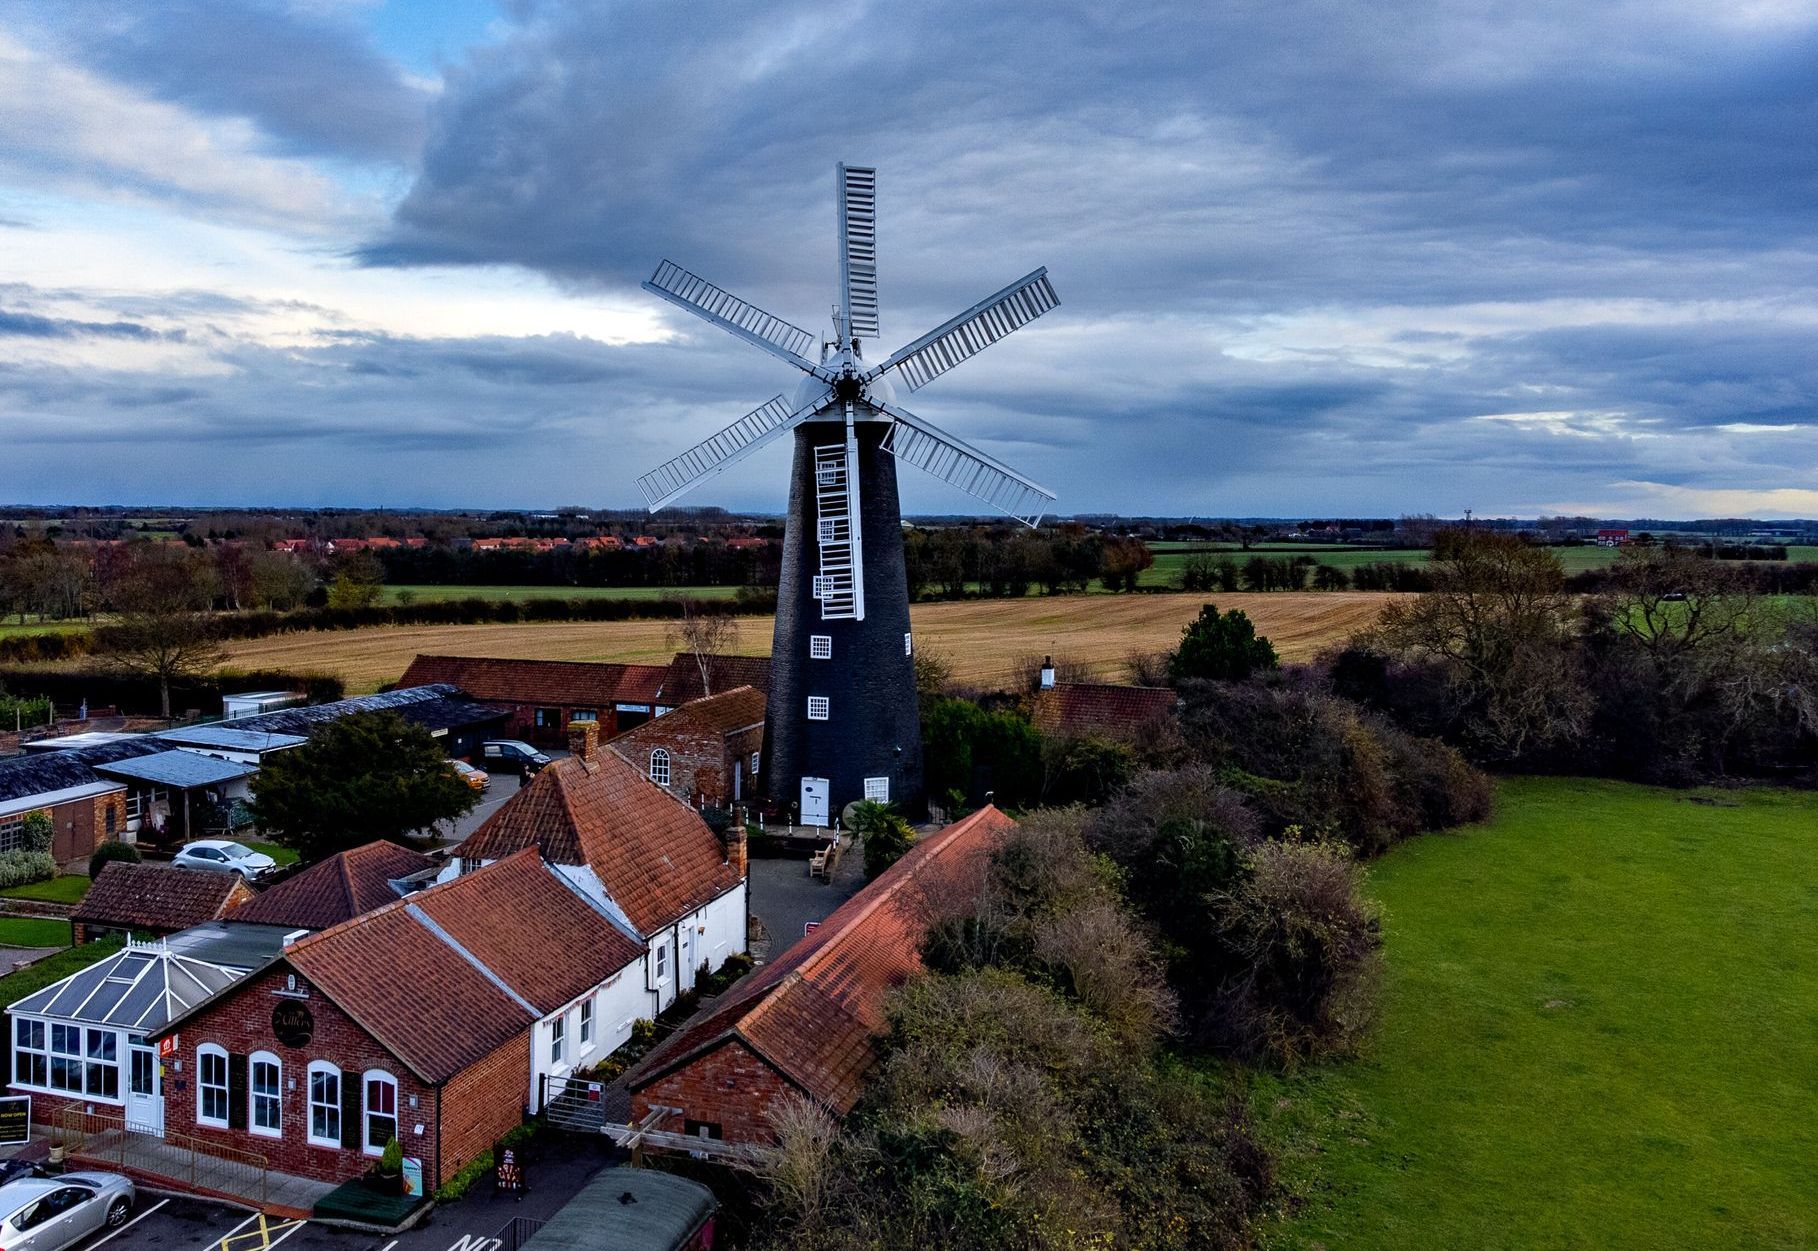 An aerial view of a windmill in the middle of a field.